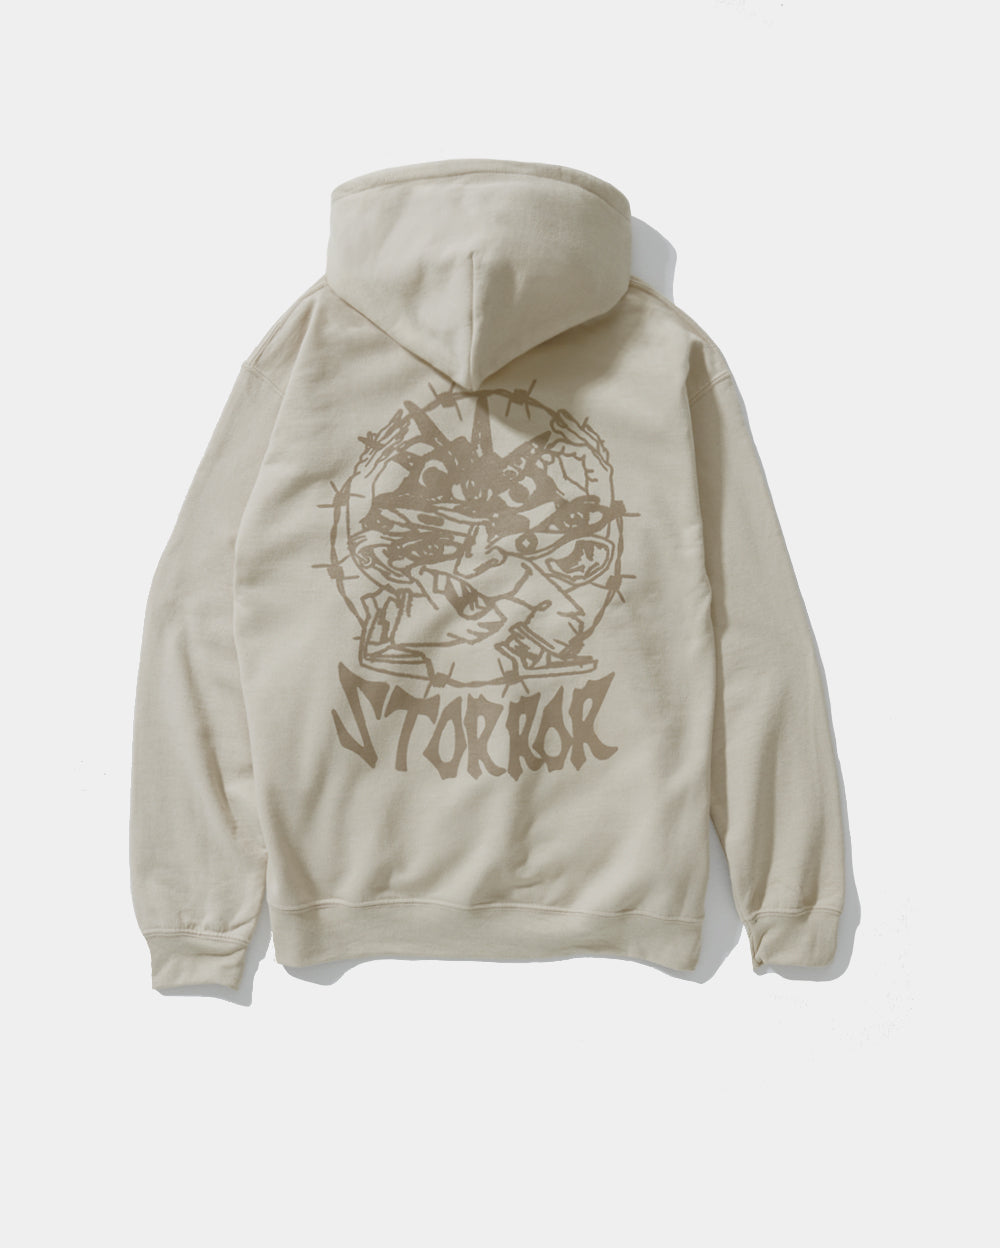 BARBED HOODIE | STORROR | parkour clothing & technical sportswear